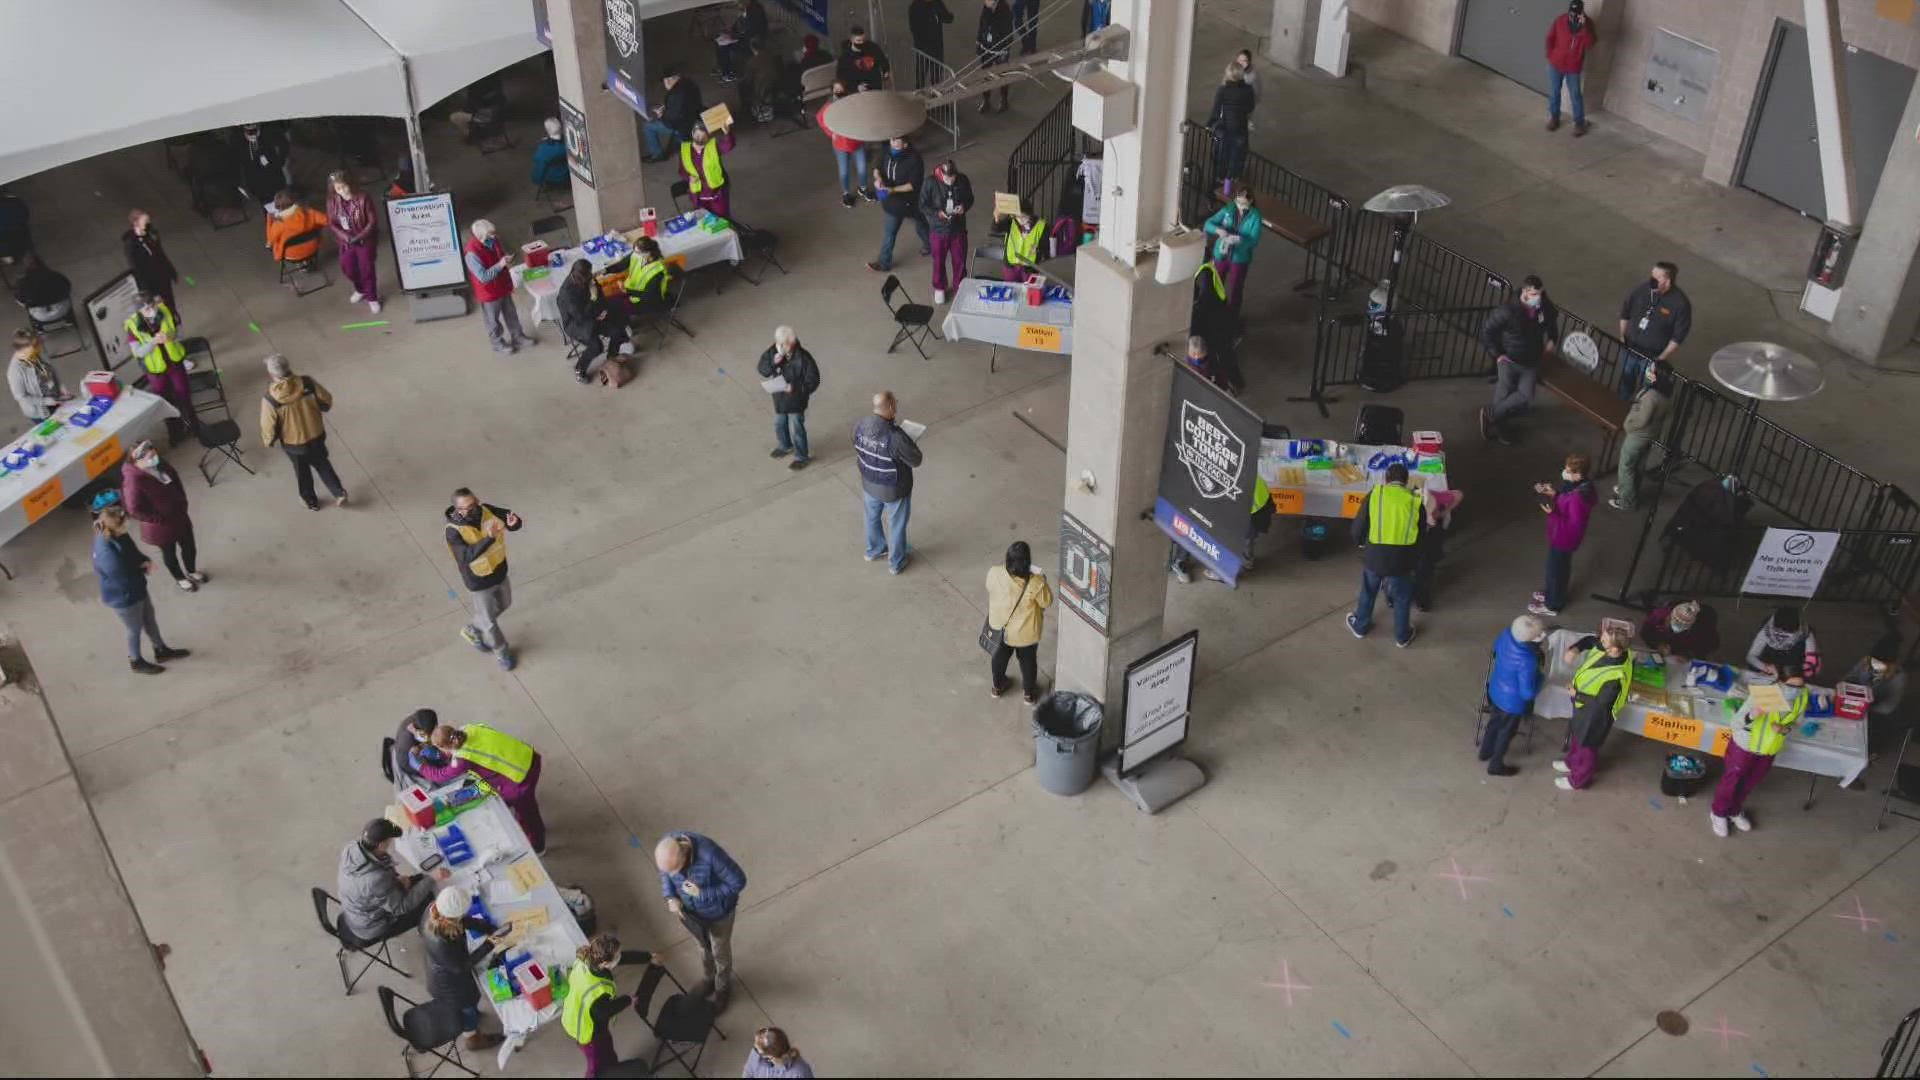 Public universities in Oregon are requiring COVID-19 vaccinations for students and staff. KGW's Joe Raineri has an update on student vaccinations by the numbers.